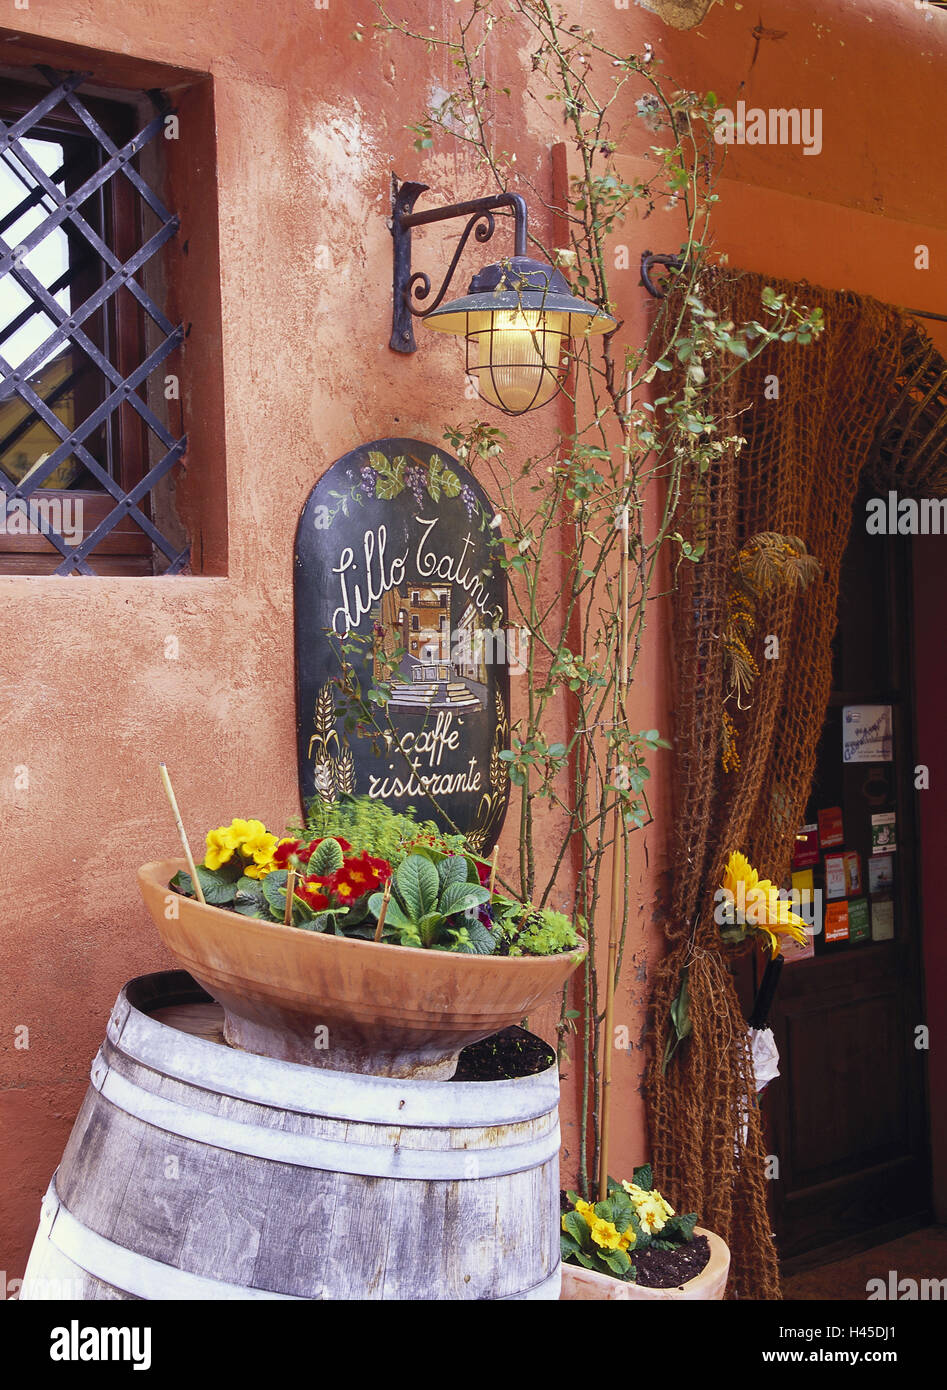 Italy, Umbria, Panicale, cafe, outside, detail, sign, wooden barrel, flowers, place, village, mountain village, building, house, bar, facade, input, flowers, plants, barrel, flower bowl, restaurant, lamp, notice board, nobody, notch, Mediterranean, idyllic, deserted, Stock Photo